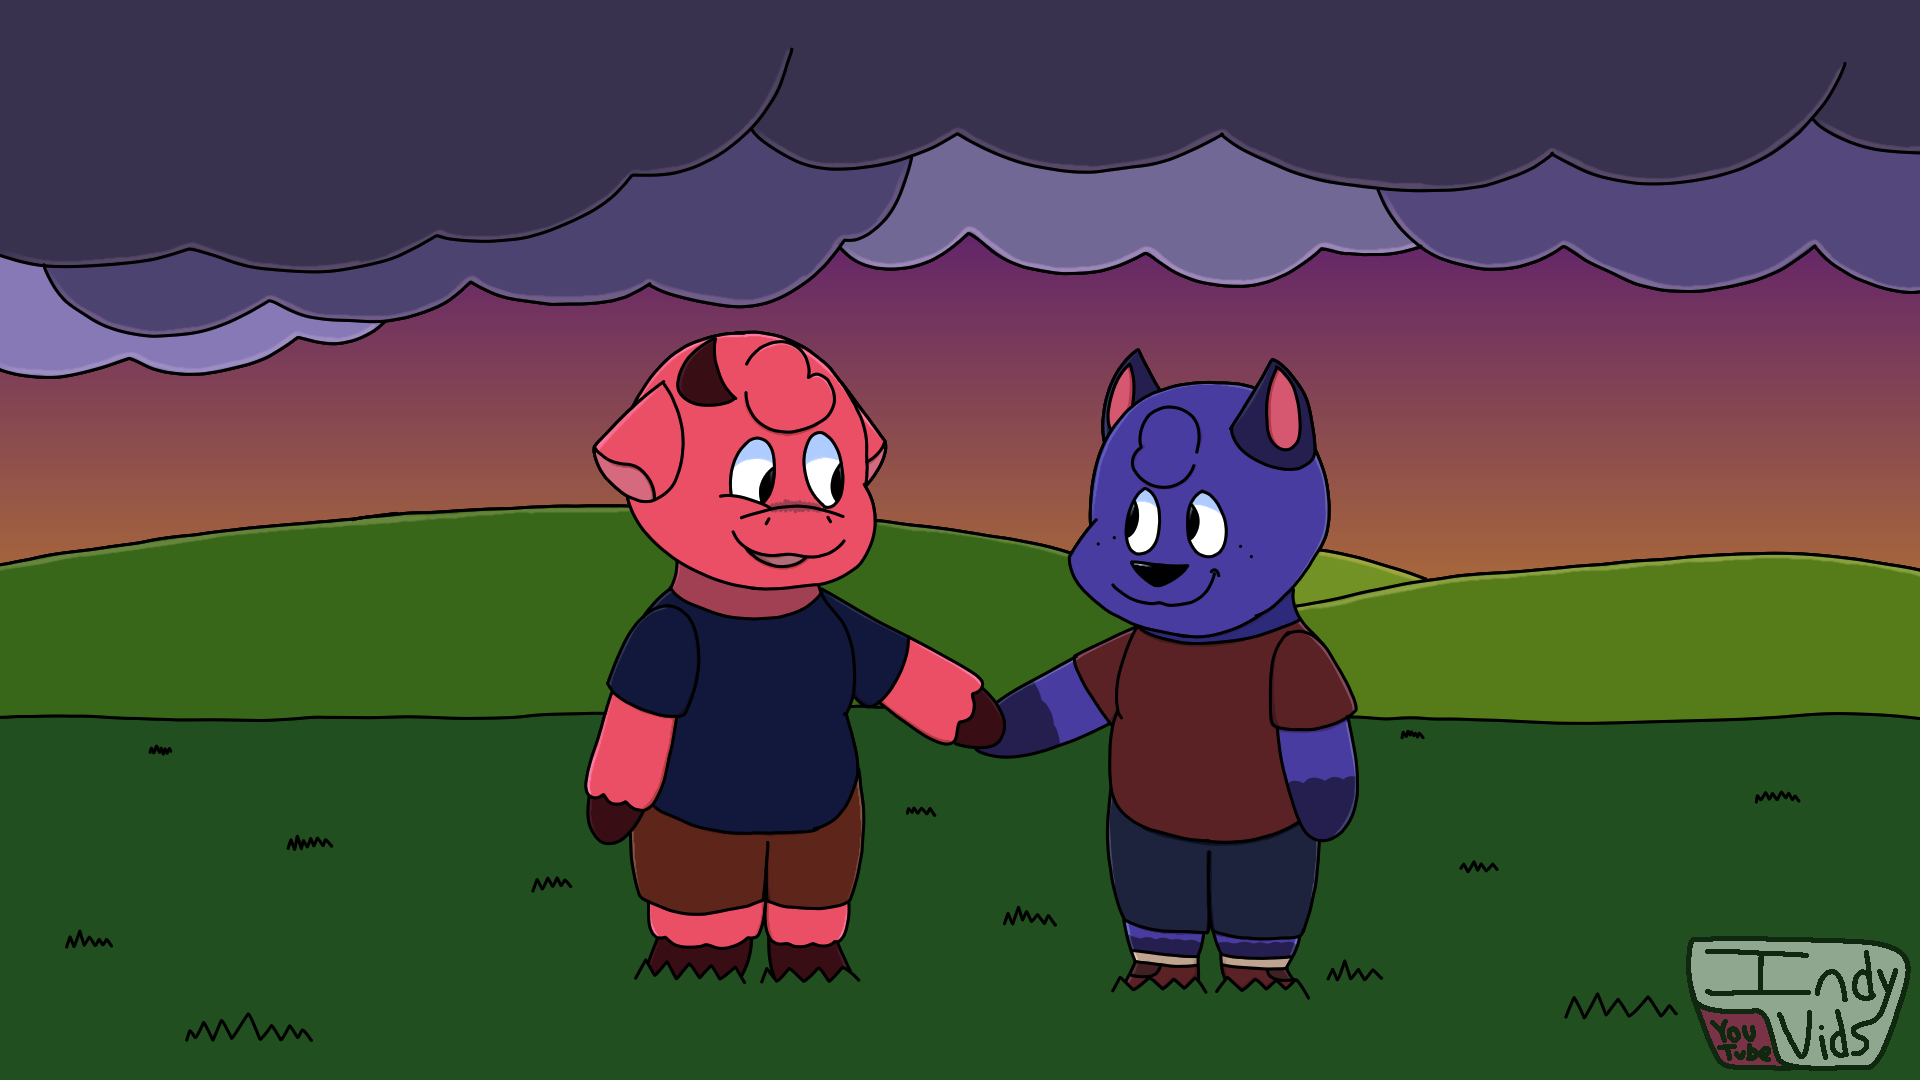 A young anthropomorphic goat and dog holding hands, with a cloudy sunset facing behind them.